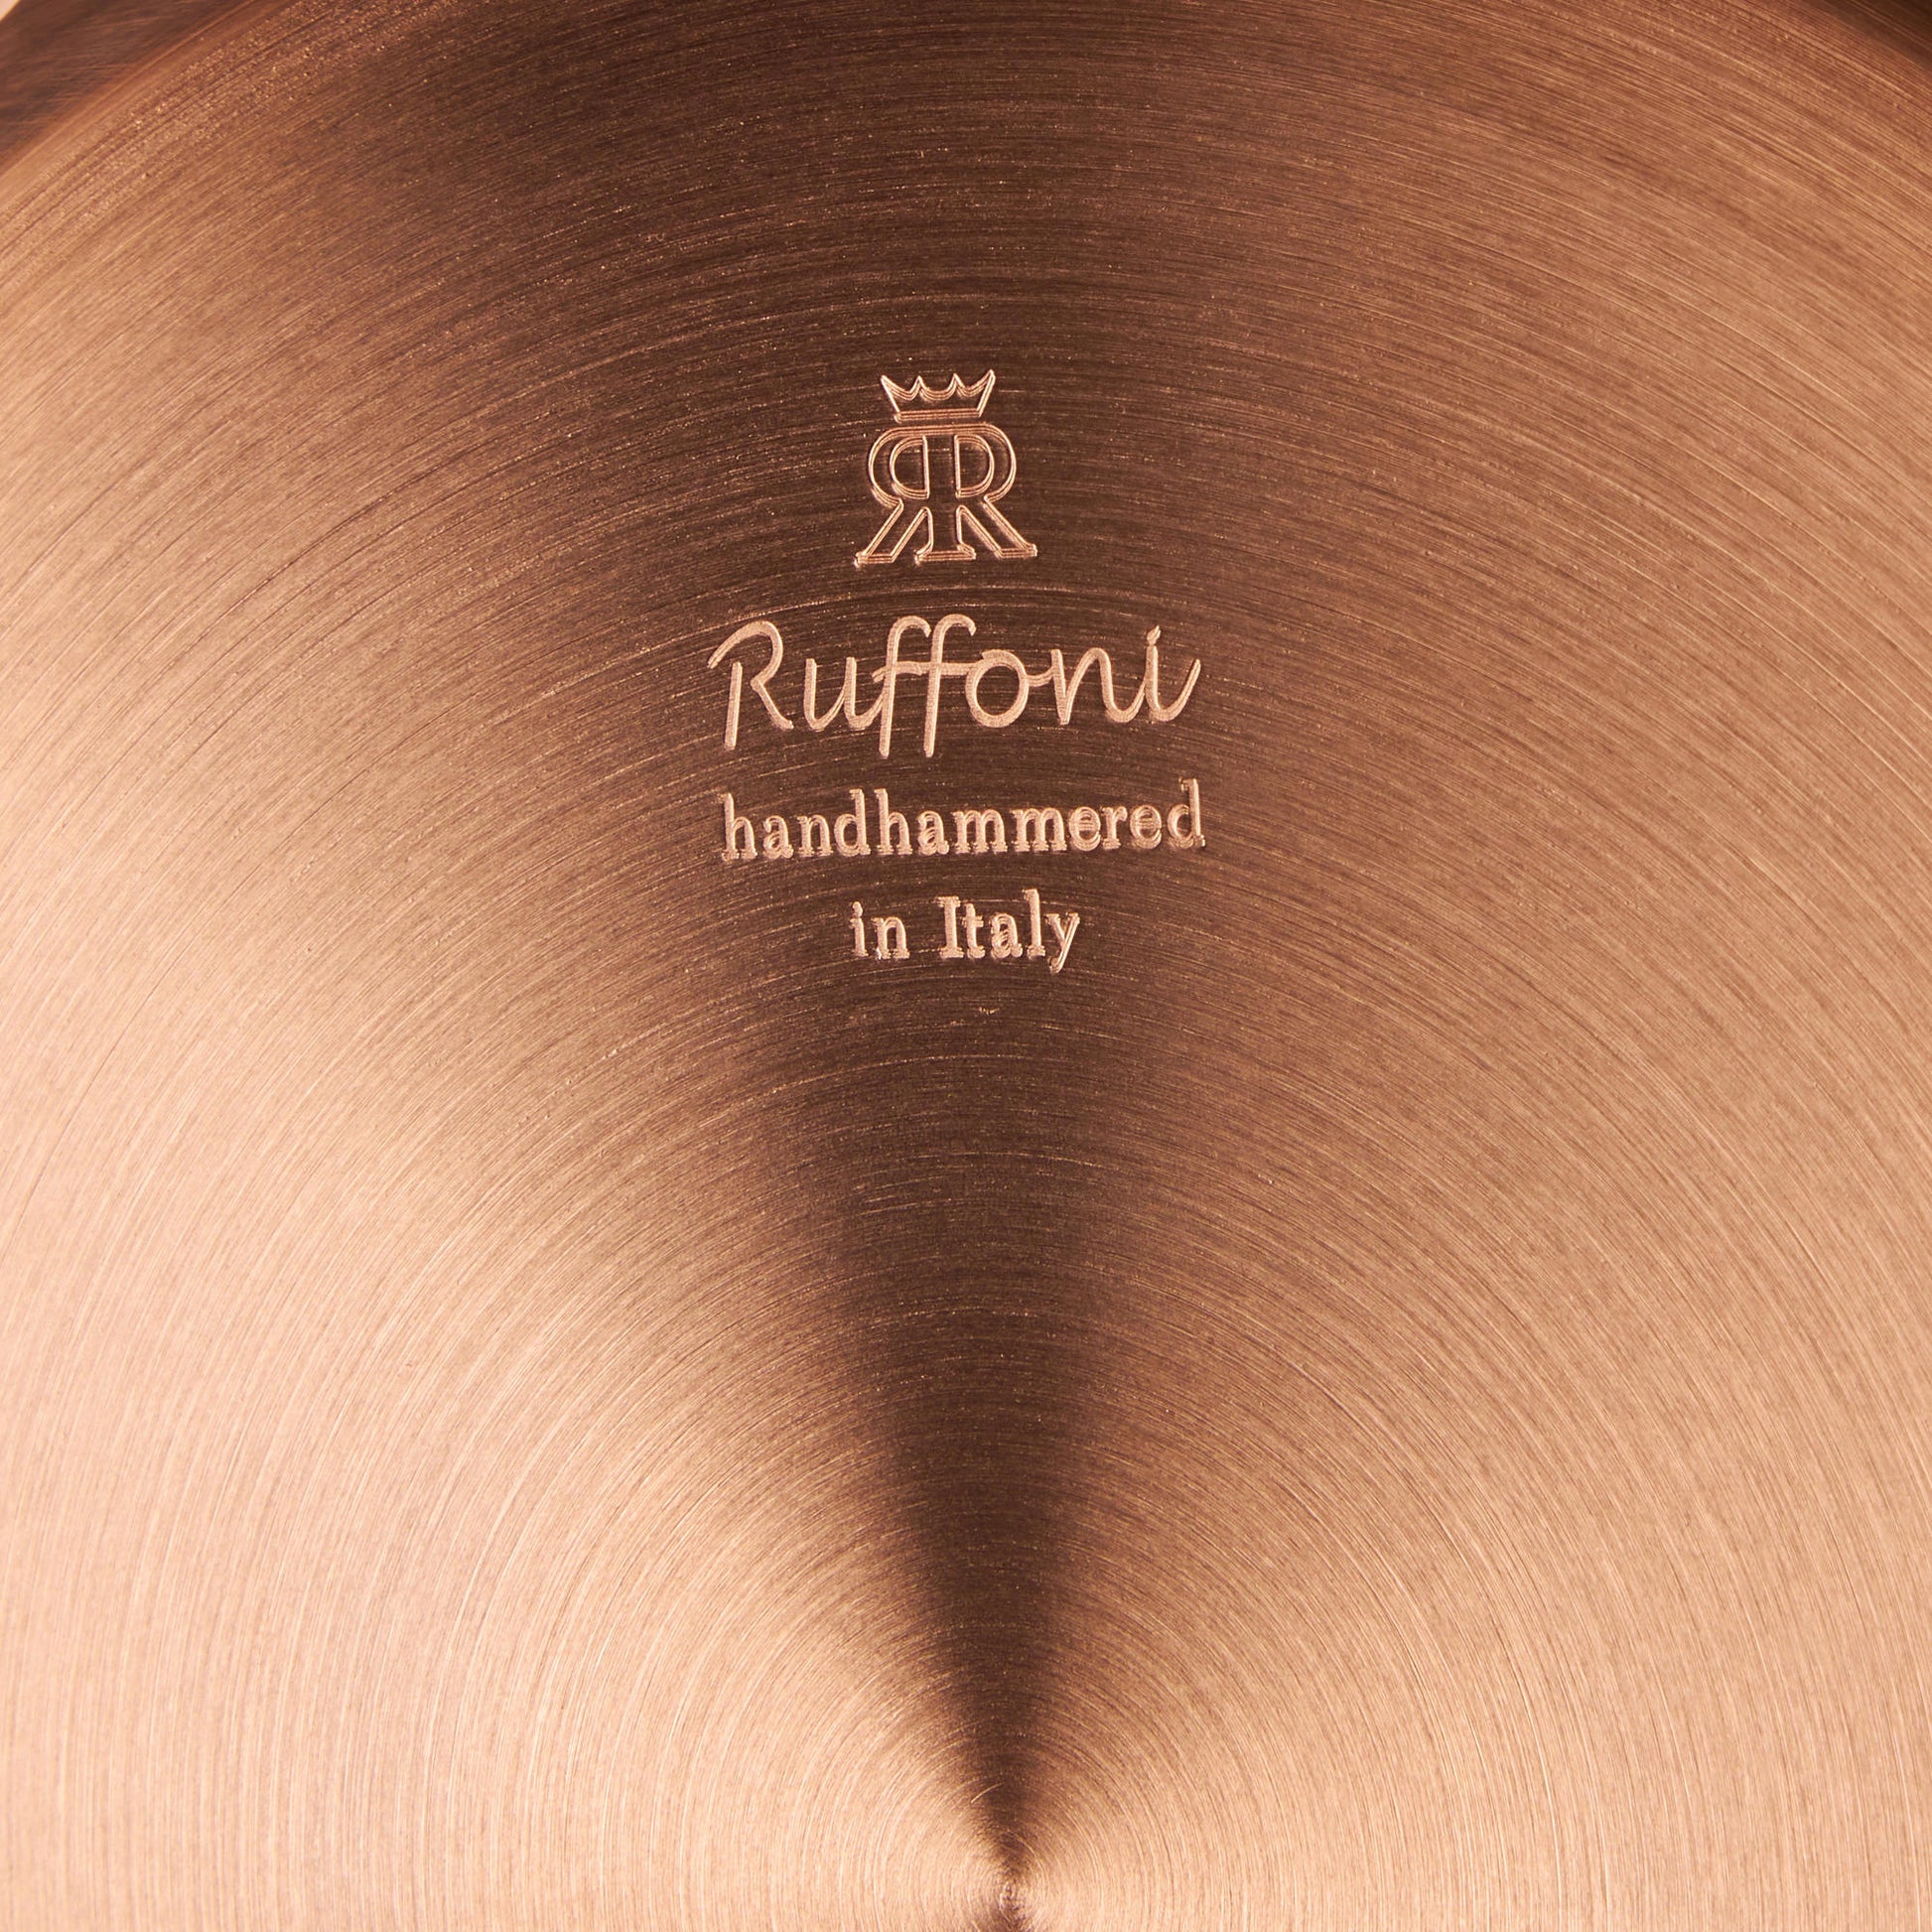 Ruffoni Made in Italy brand logo stamped under Opus Cupra copper  sauté for authenticity